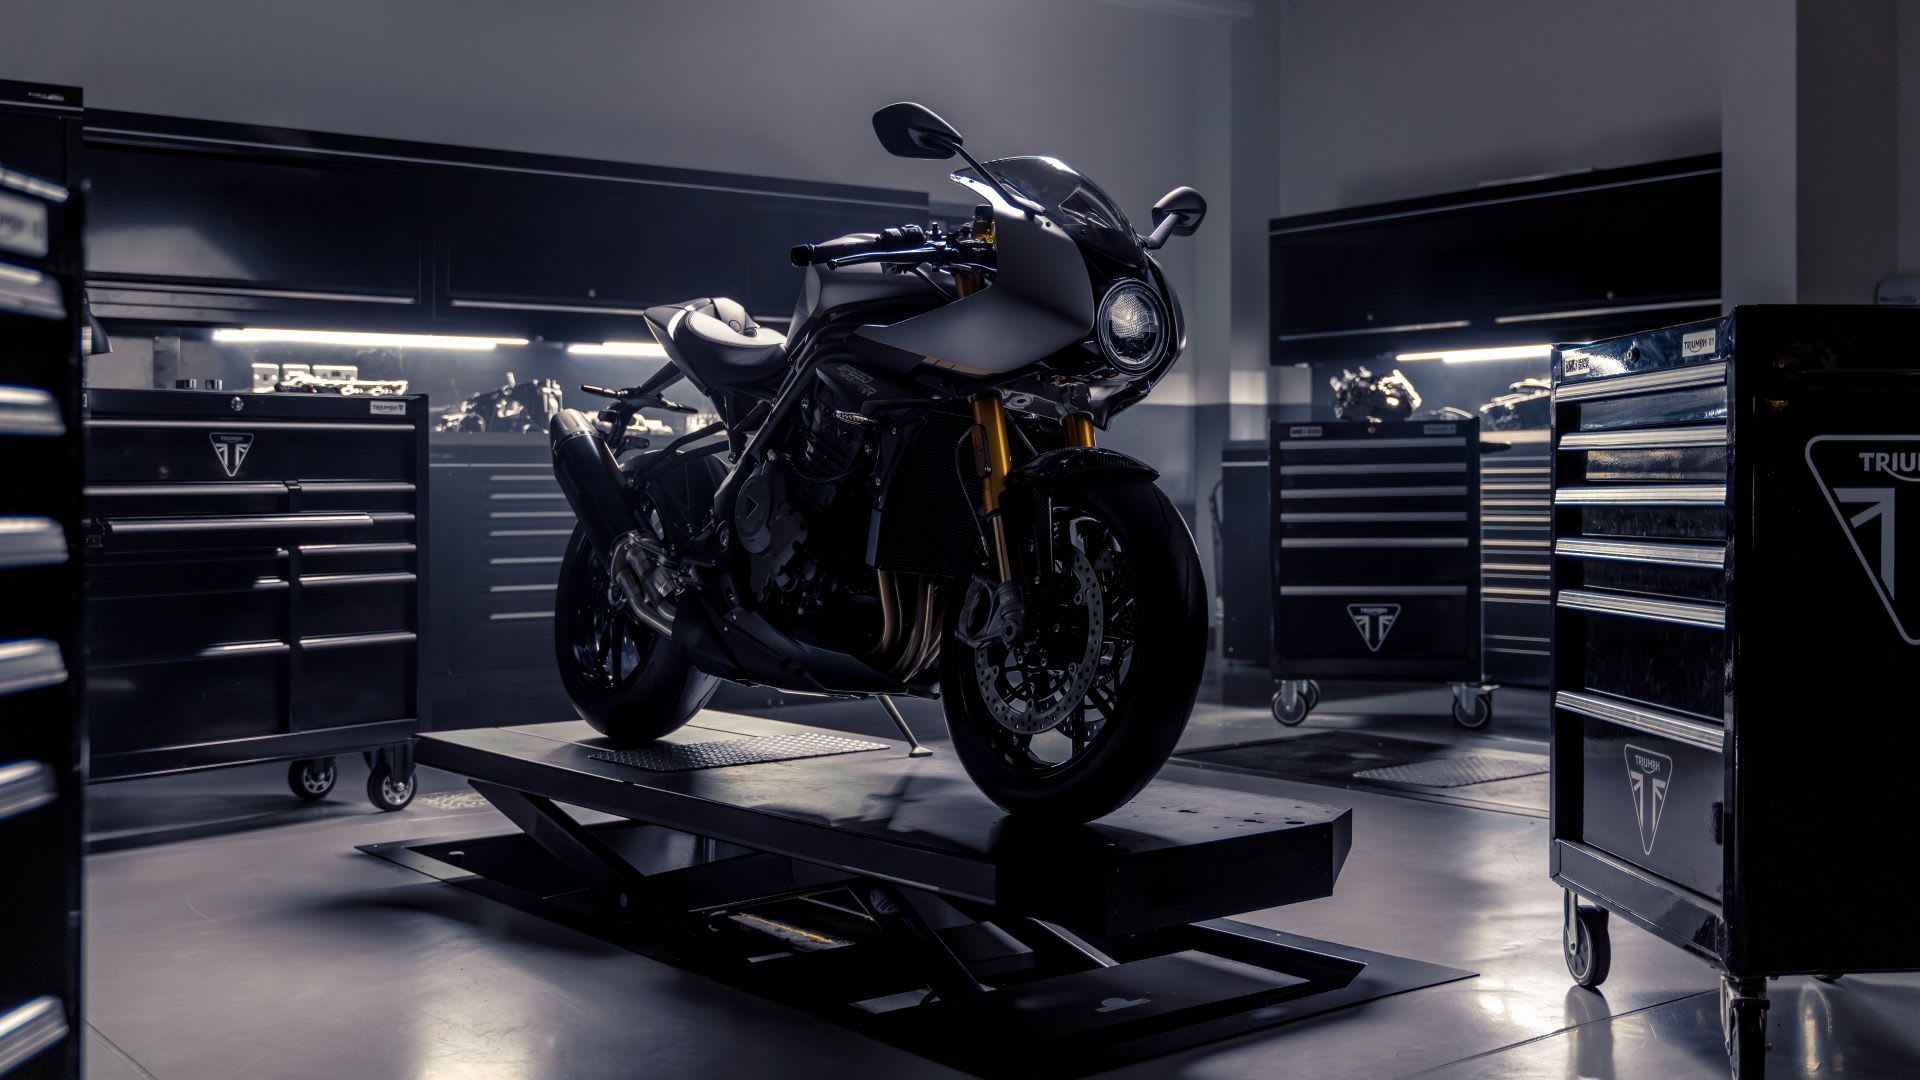 Breitling and Triumph's Speed Triple 1200 RR Breitling Edition